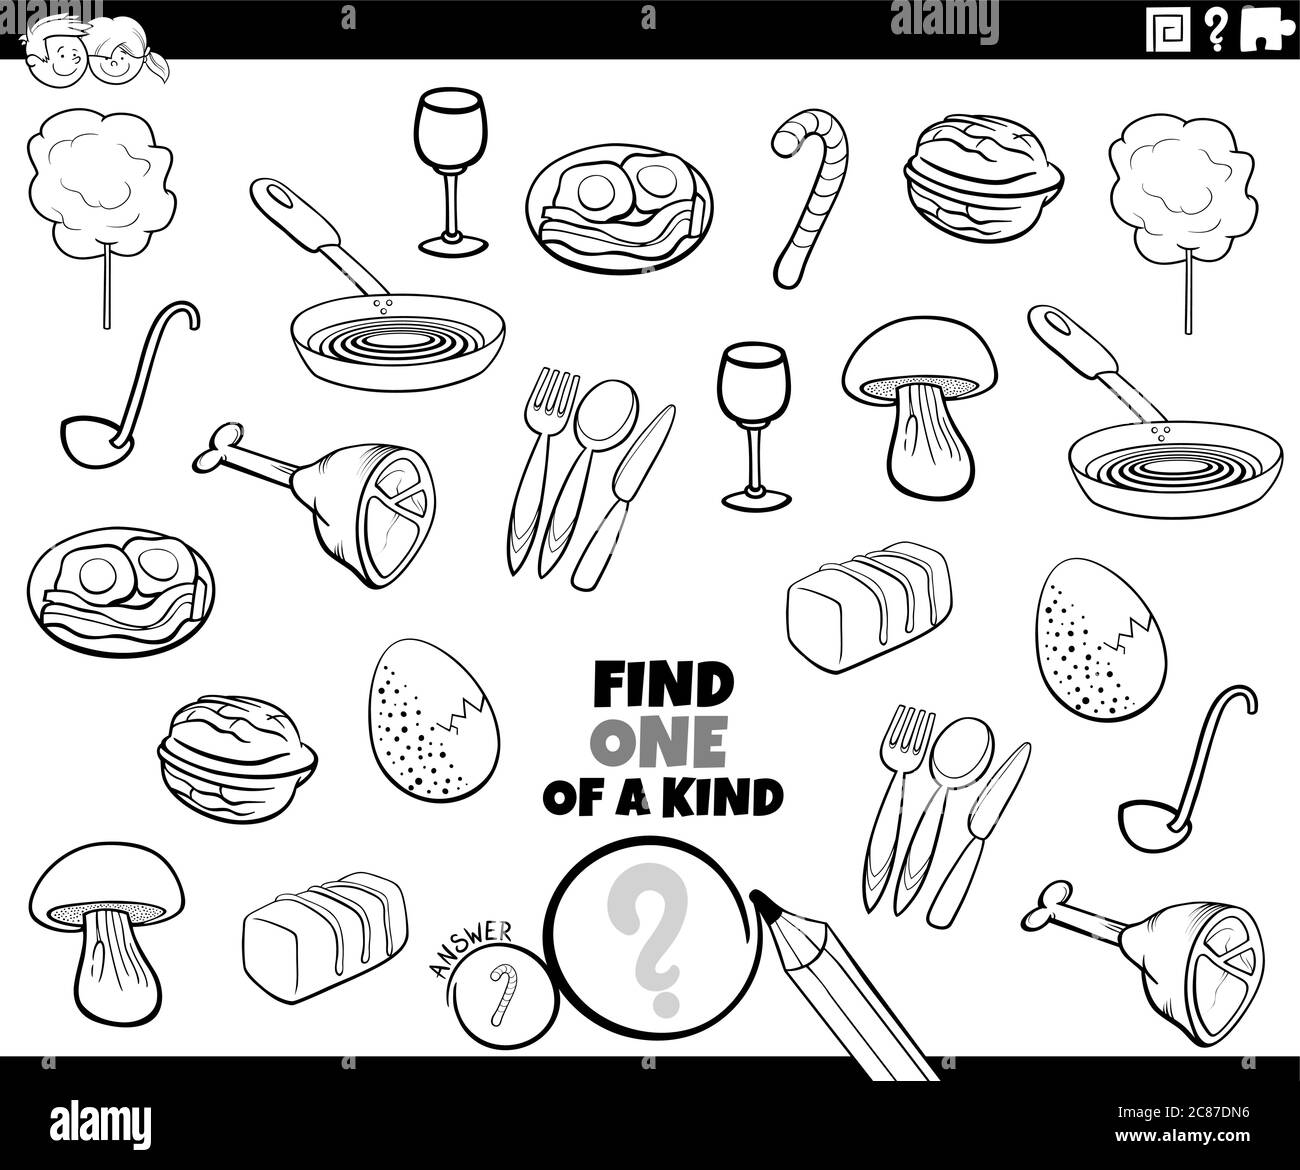 Black and White Cartoon Illustration of Find One of a Kind Picture Educational Game with Food Objects and Utensils Coloring Book Page Stock Vector